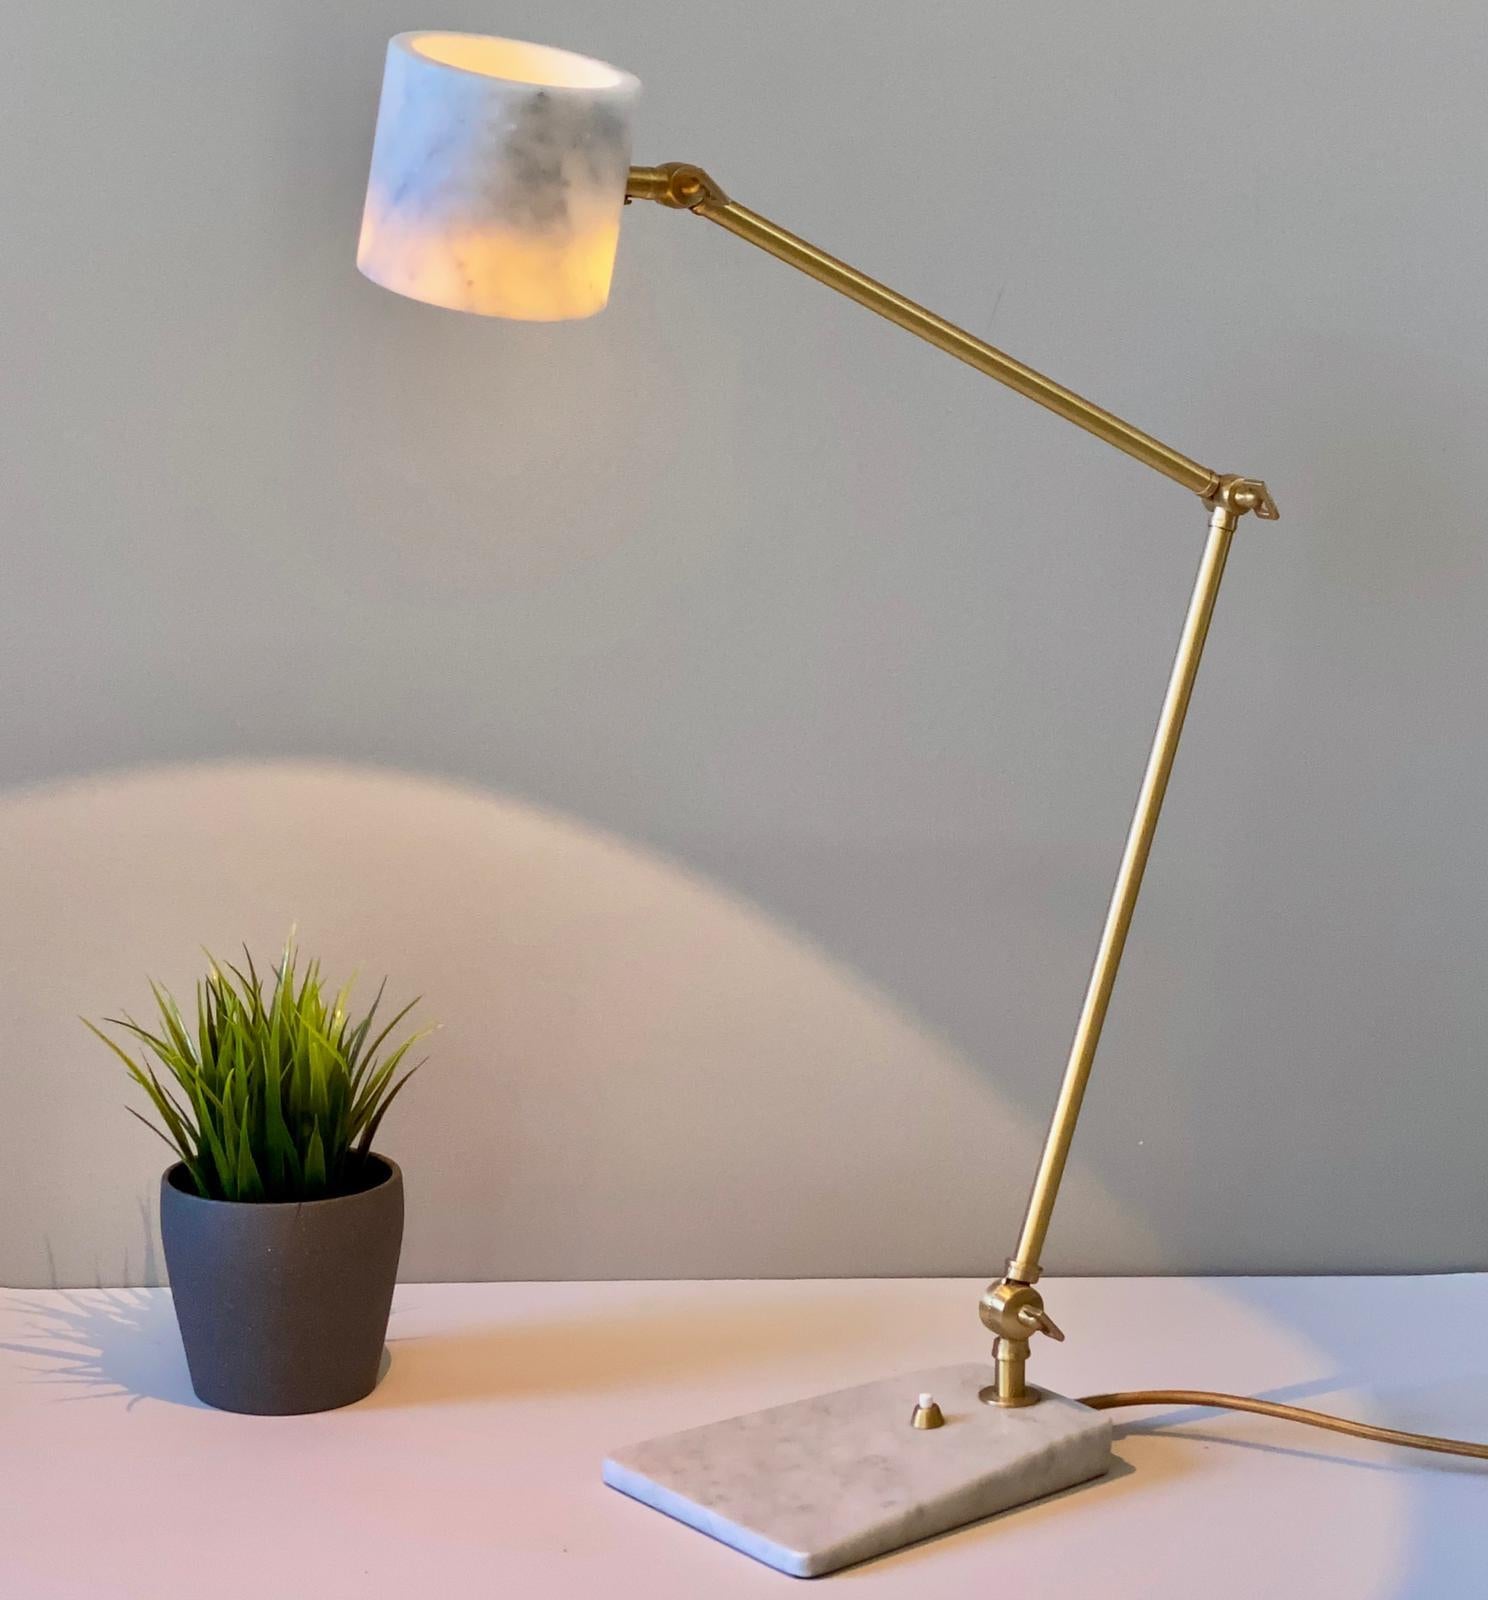 Cosulich interiors in collaboration with Matlight Studio: The bespoke organic modern flamingo lamp, entirely handcrafted in Italy, is characterized by a vintage look and by the contrast between the volumes of its elements: the elegant thinness of